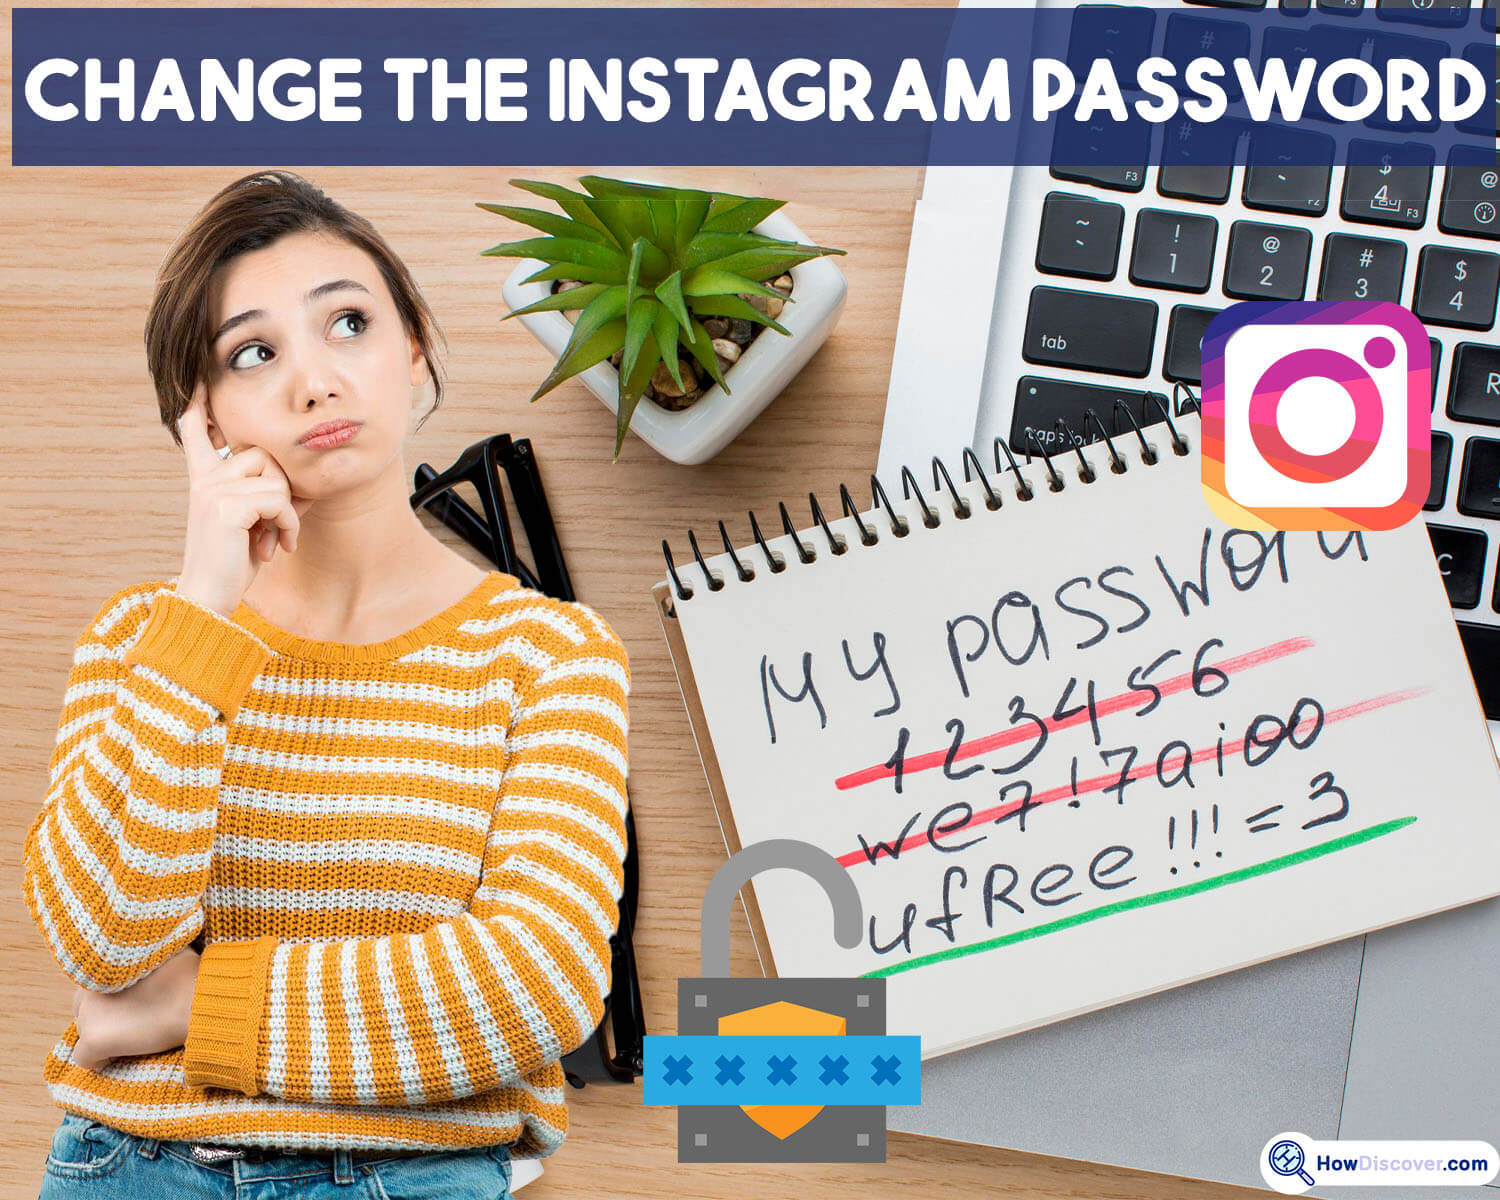 How To Change Instagram Password Without Old Password - Steps to change the Instagram password without the old password